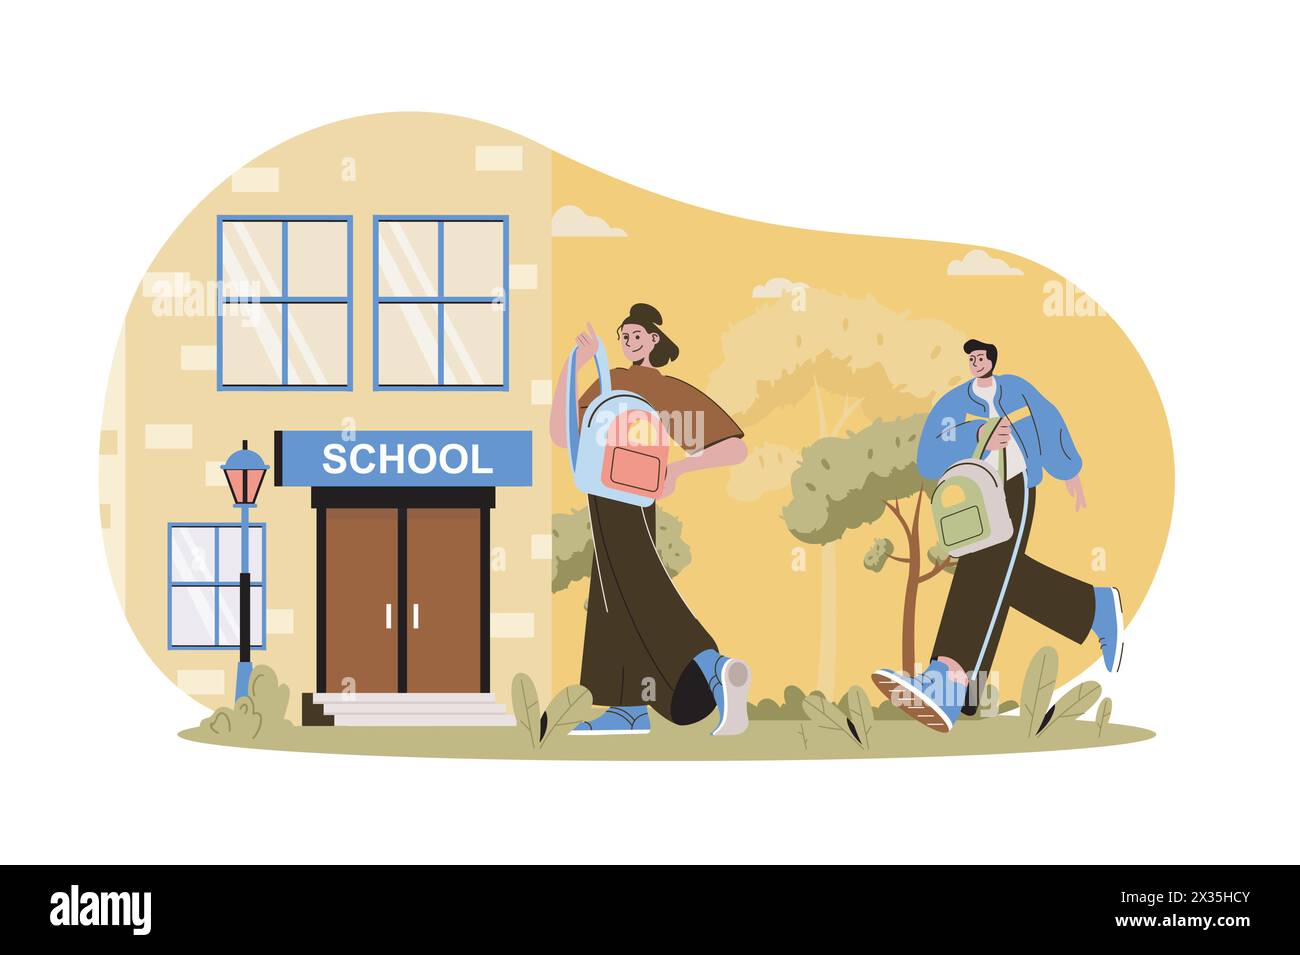 Children go to school web character concept. Pupils with schoolbags go to lessons. Teenage classmates rush to college, isolated scene with persons. Ve Stock Vector